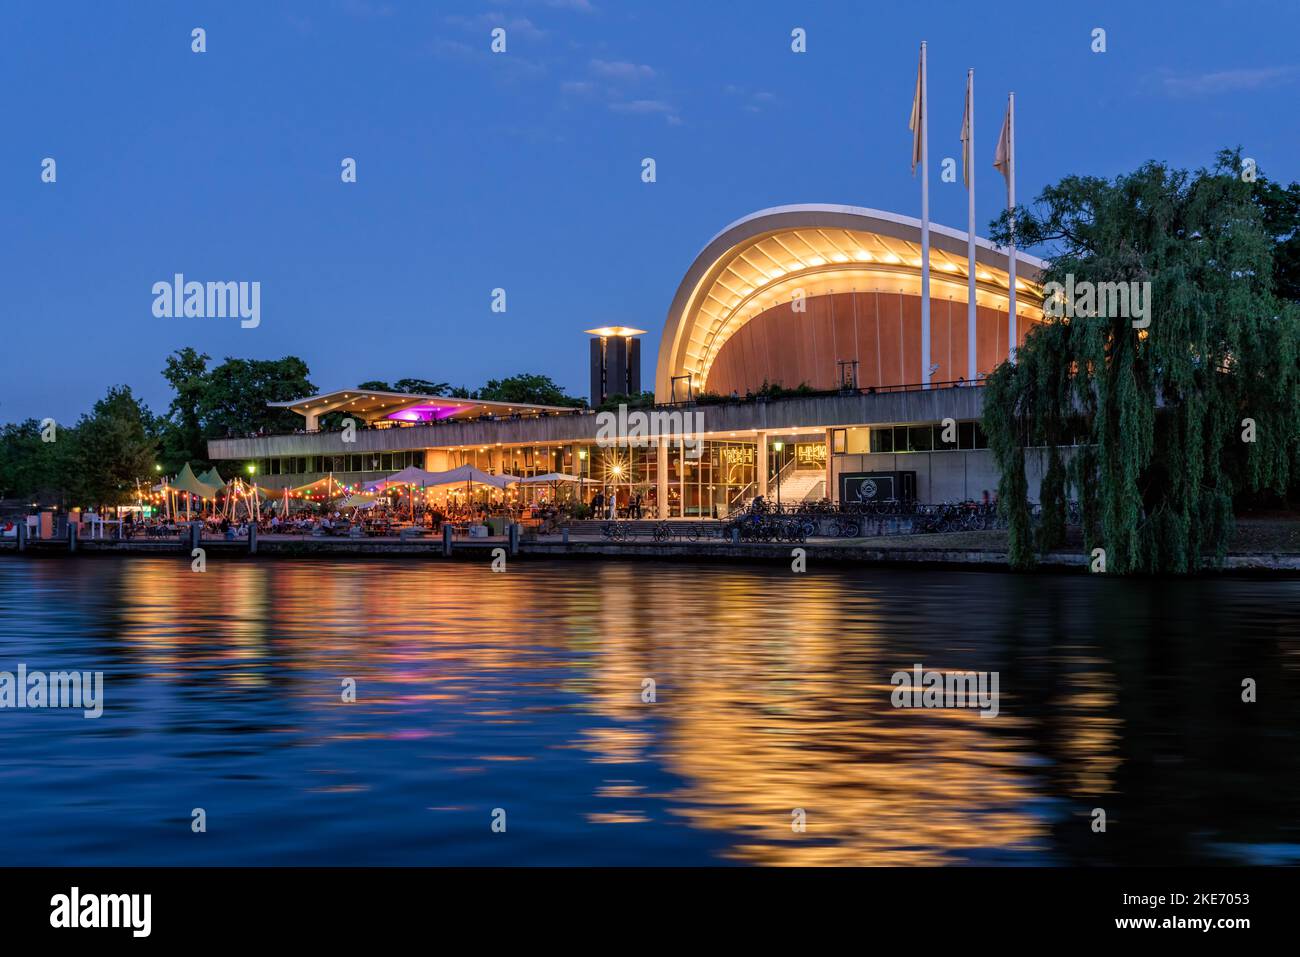 The house of world cultures on the Spree river, in Berlin Germany. Stock Photo